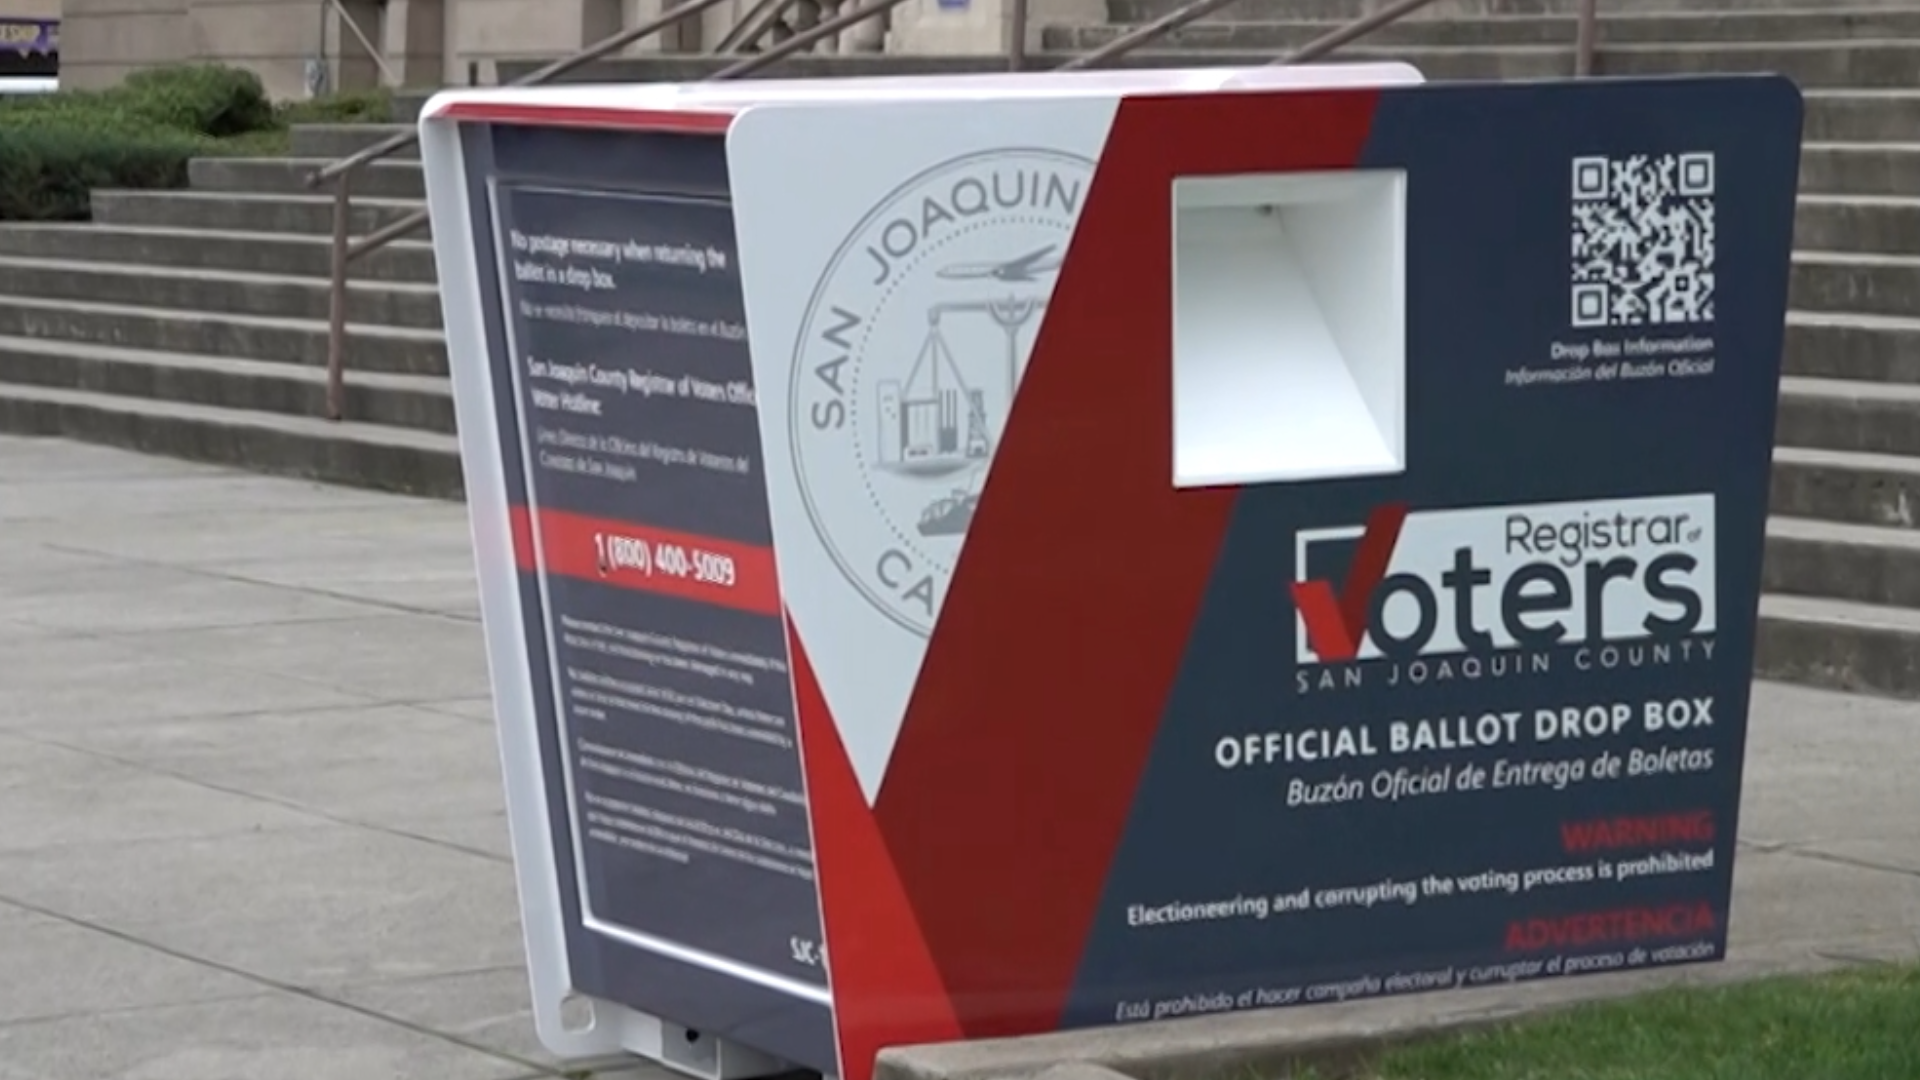 Part of the preparations weeks ahead of the Primary Election includes finding locations to place two ballot drop boxes.